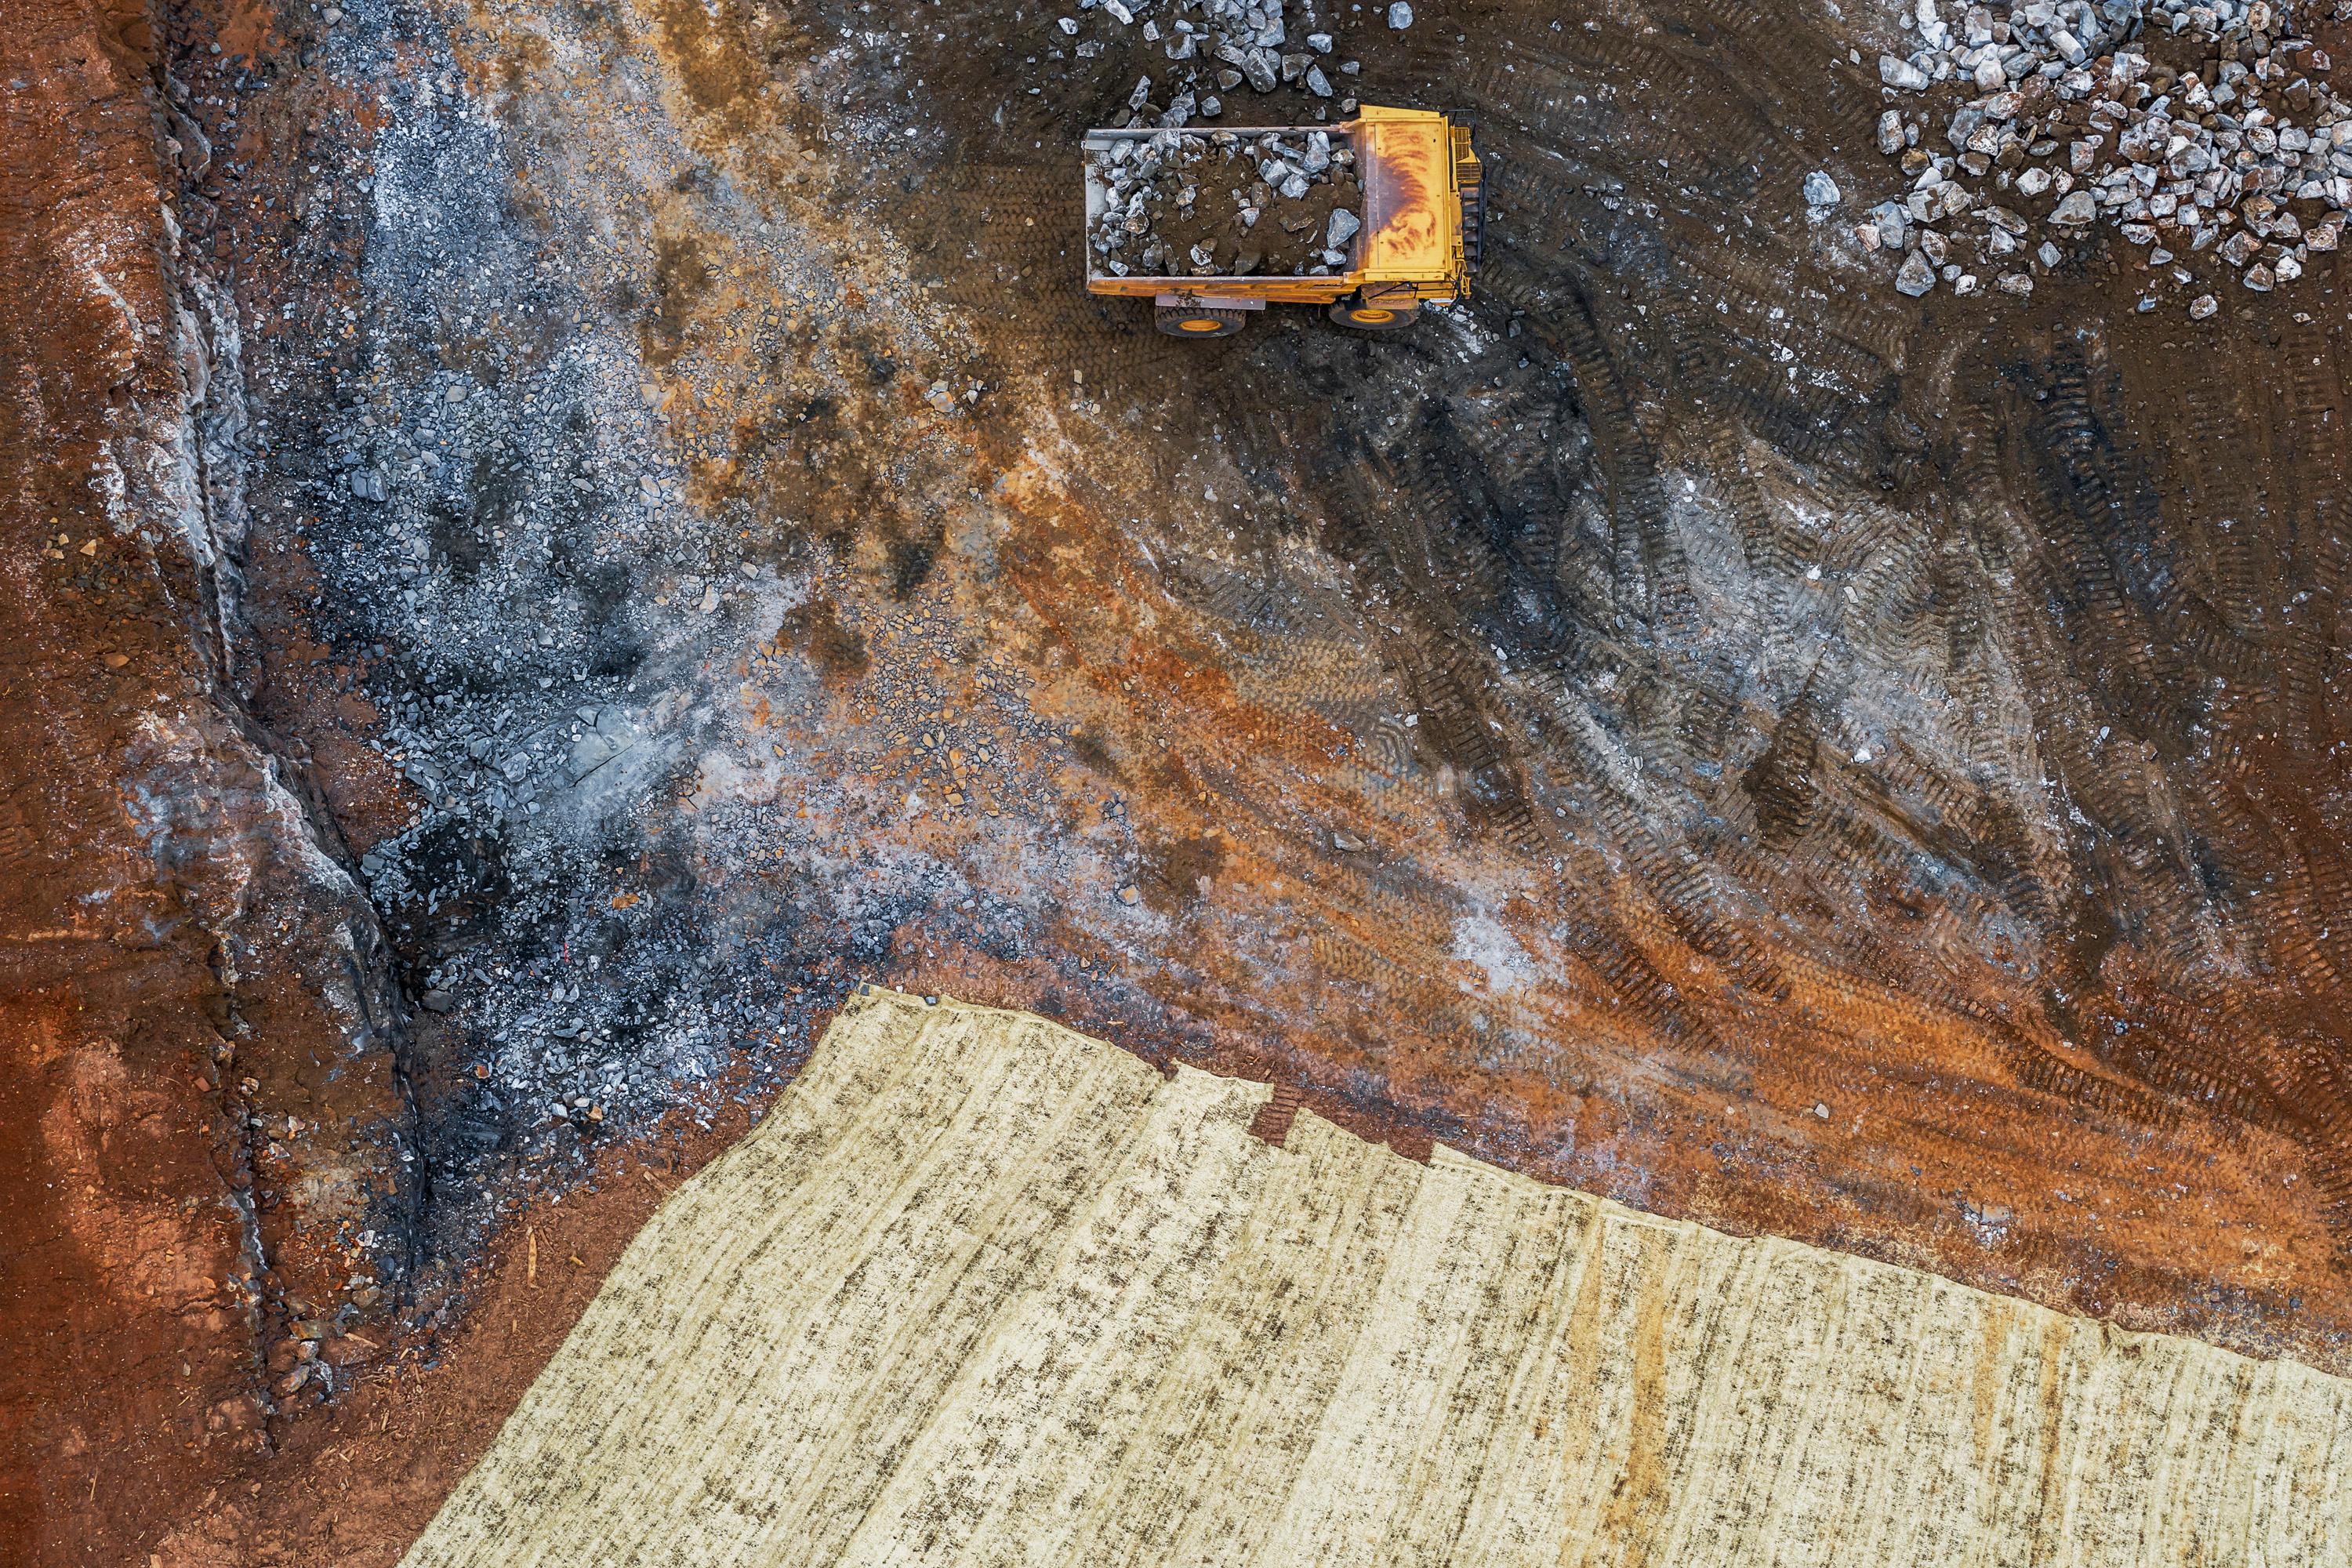 "Construction Site, Snellville, Georgia #5, 2019" is a drone photograph featuring hues of orange, black, white and grey. Edition of 5. This photograph may be available in additional sizes. Peter Essick is inspired by the work of Walker Evans, Ray